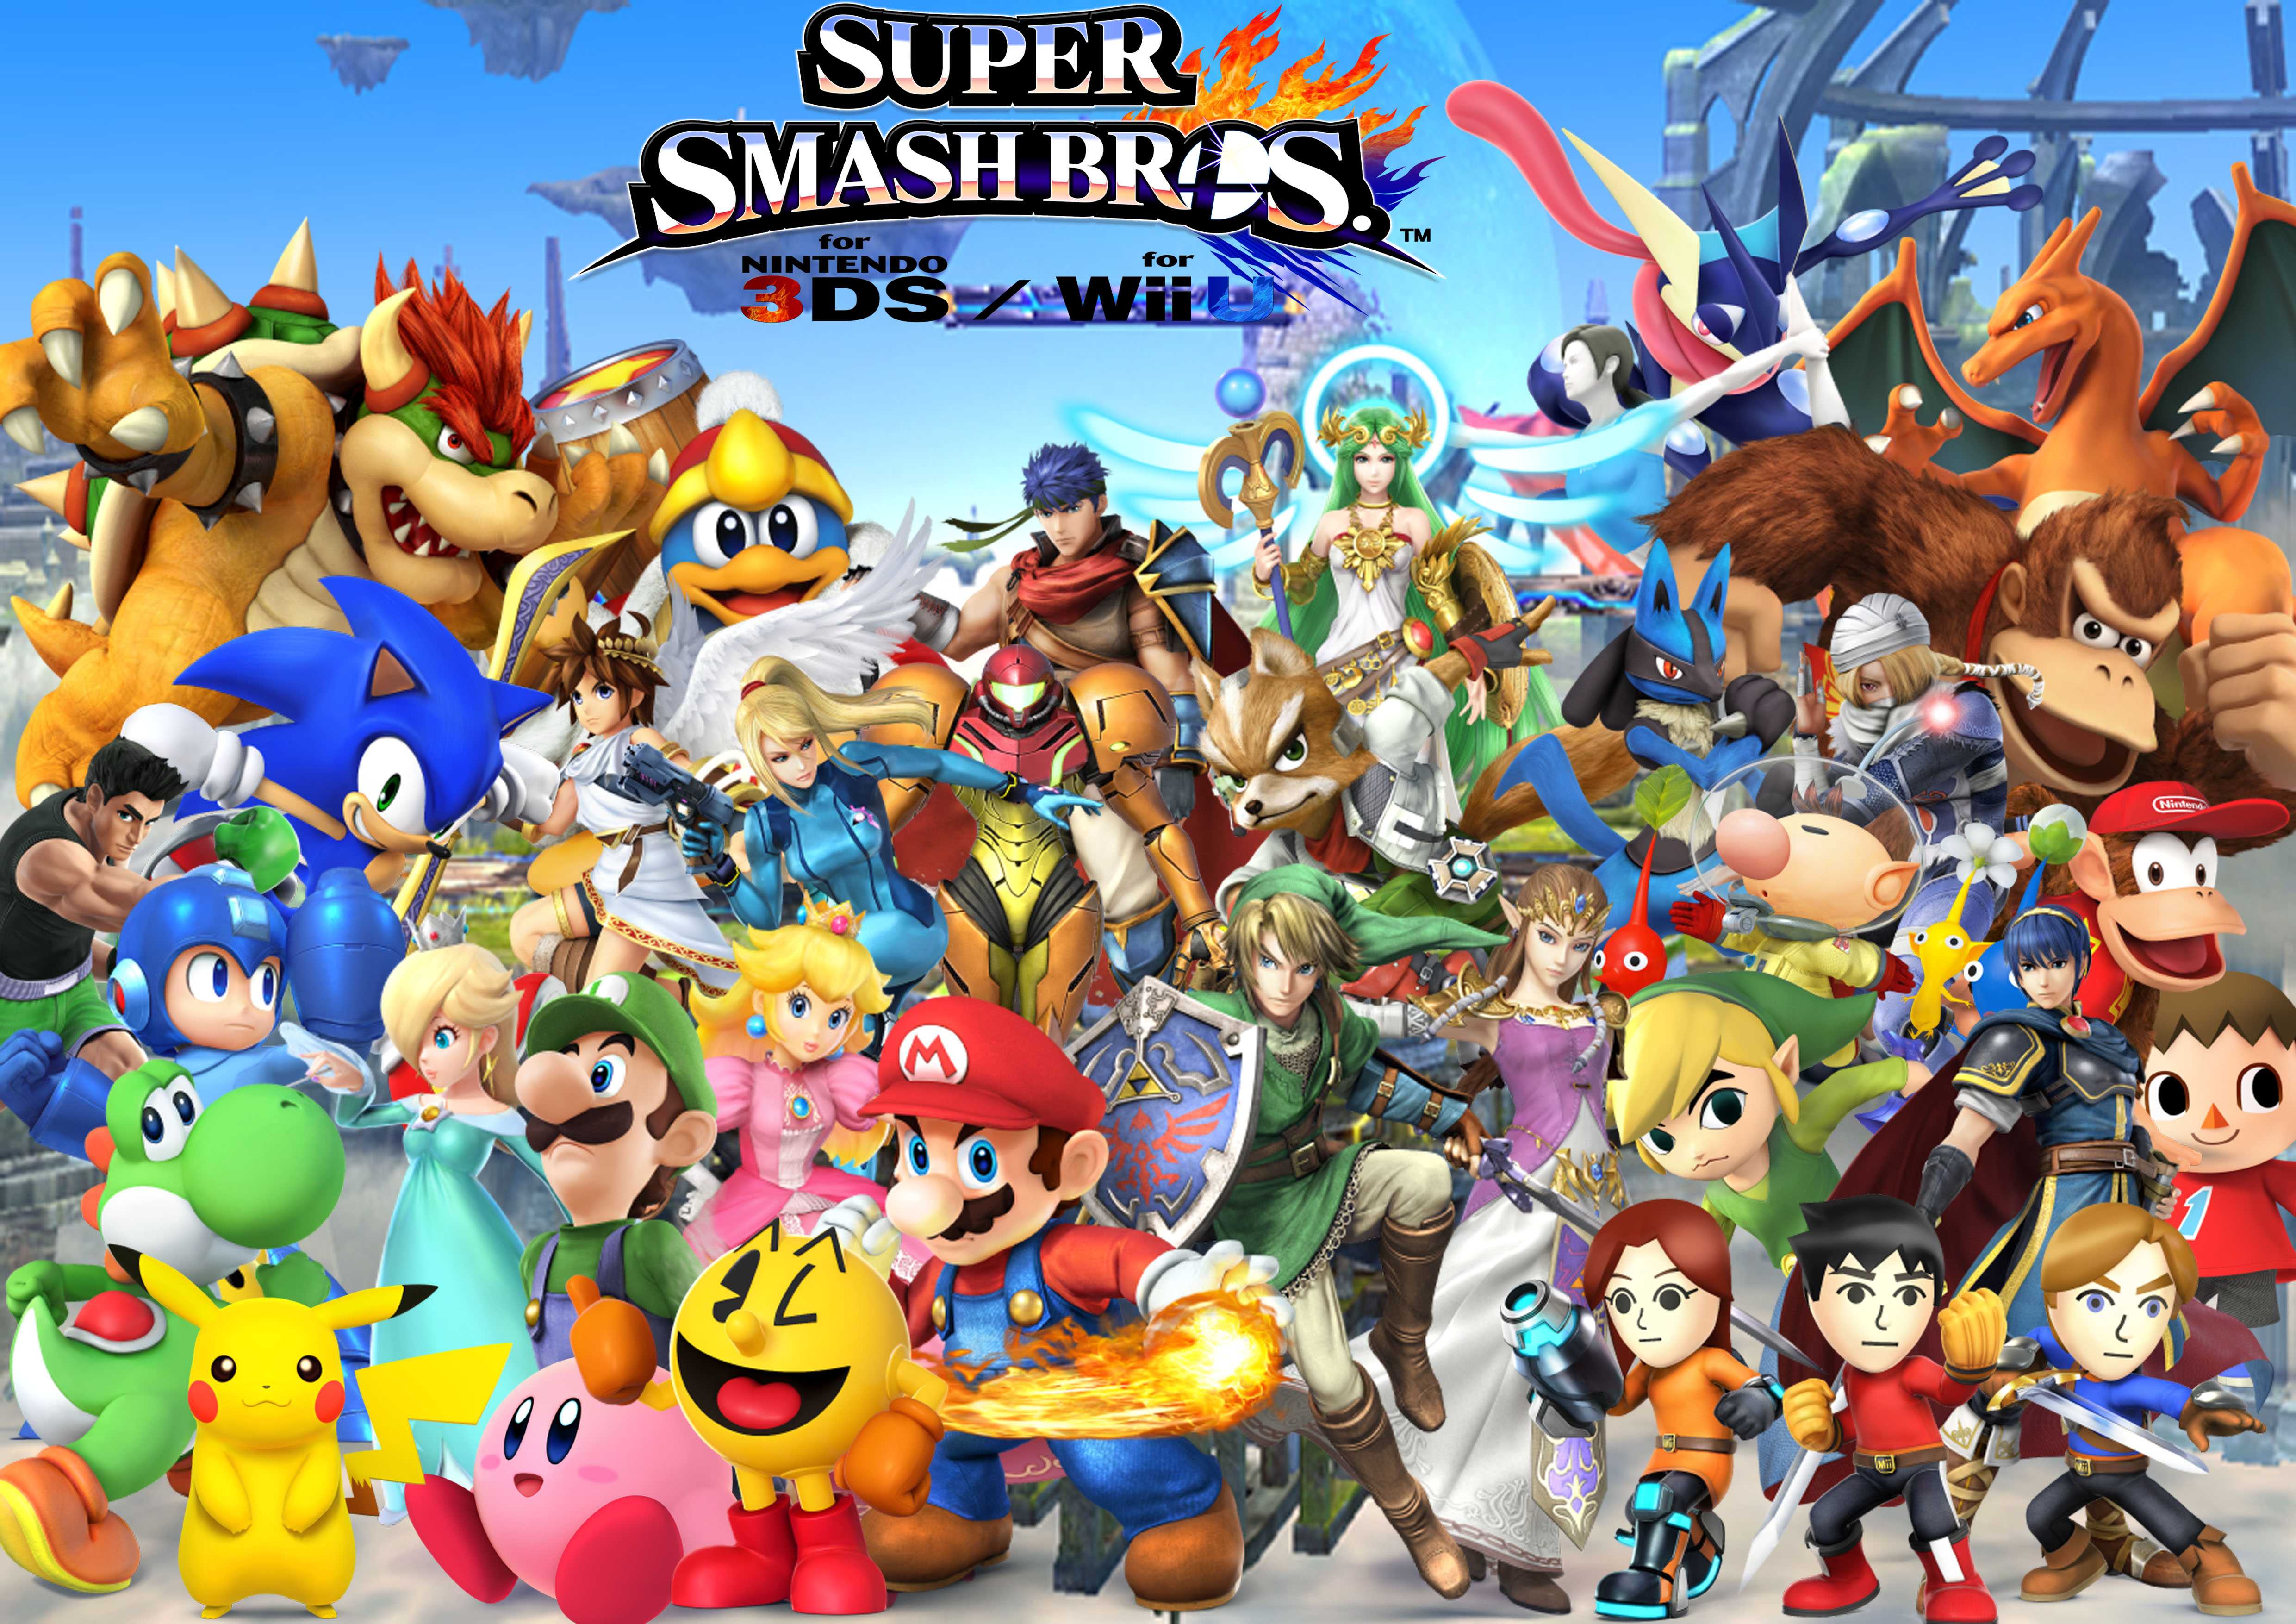 Games just like Super Smash Bros. (UPDATE: All Pics Added